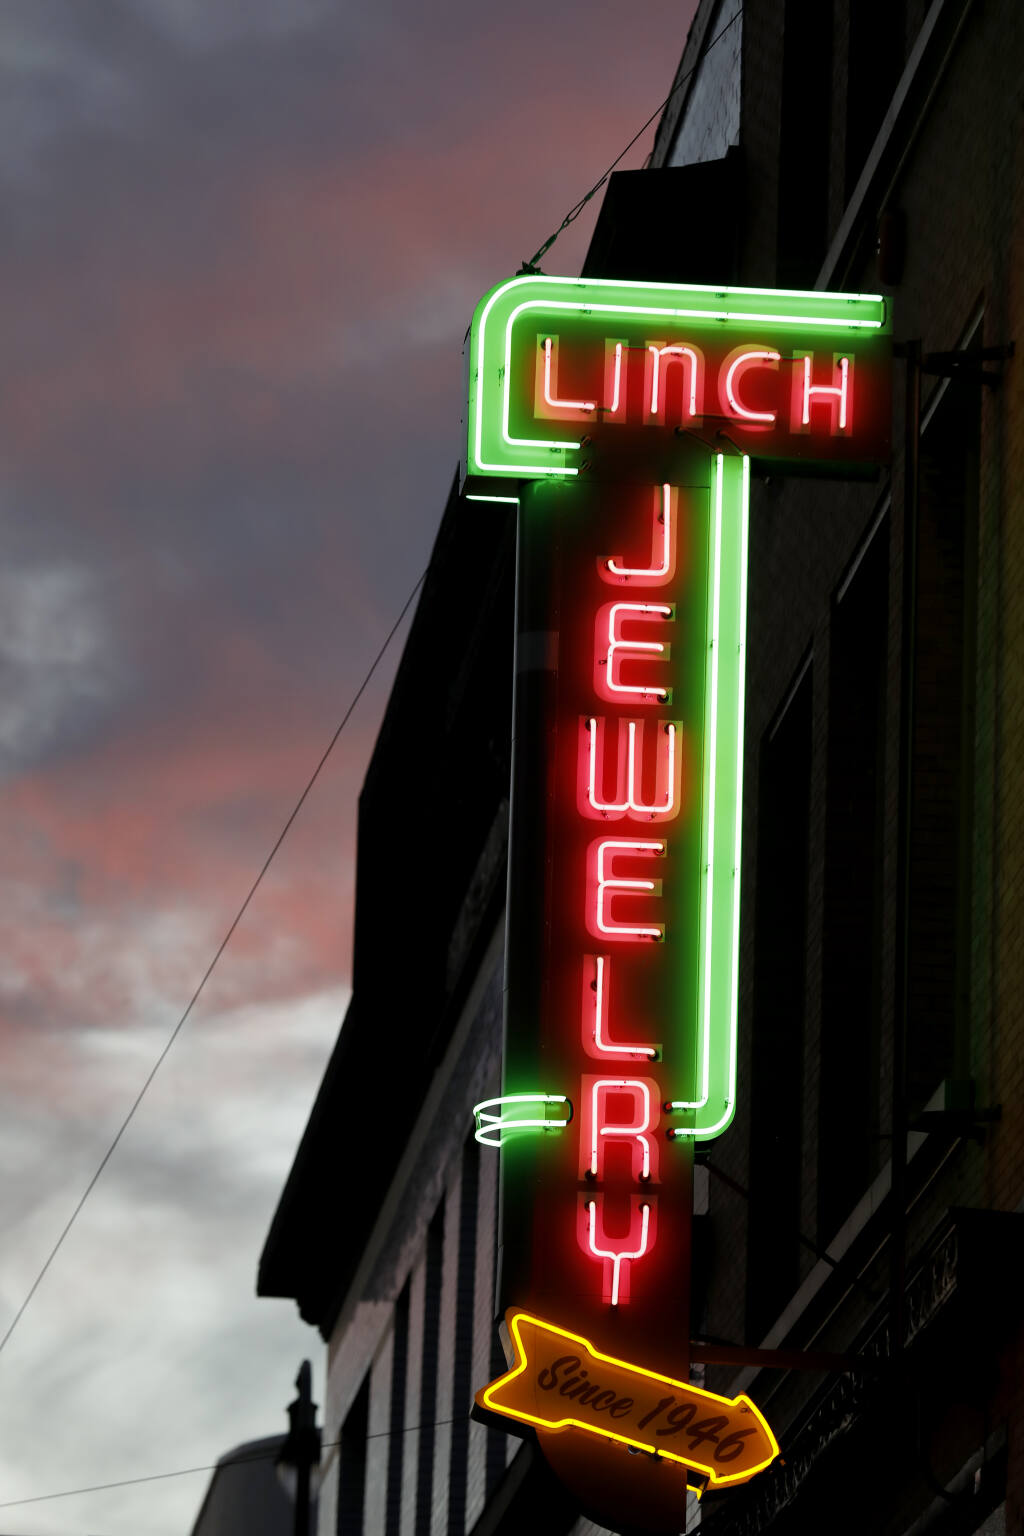 The newly restored Linch Jewelry sign now burns brightly in downtown Petaluma. (Beth Schlanker/The Press Democrat)